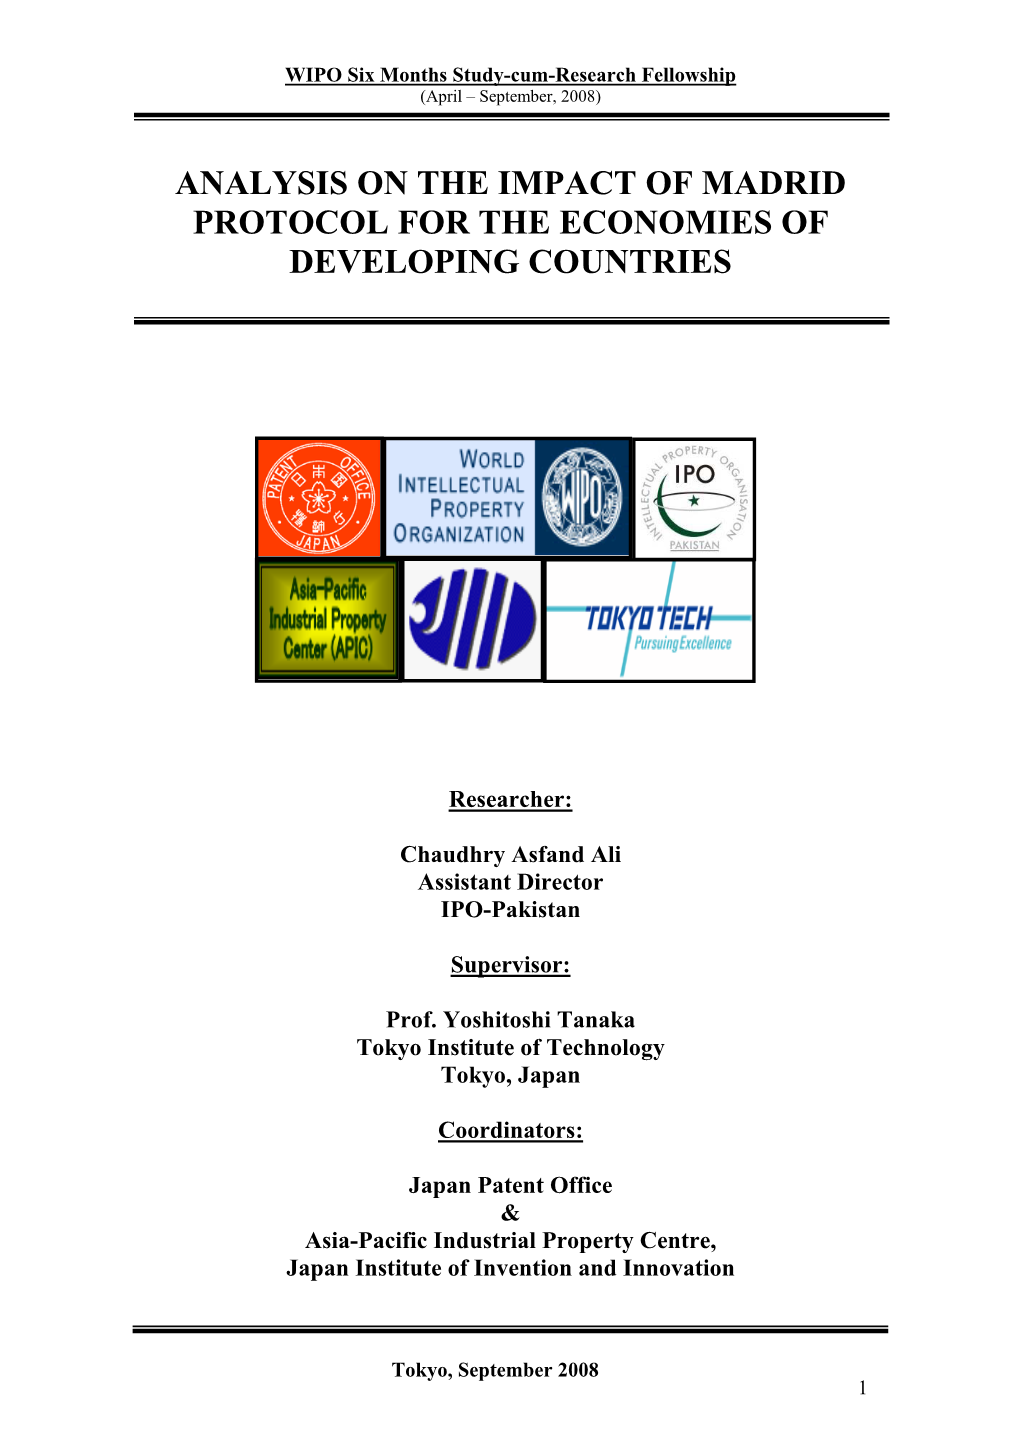 Analysis on the Impact of Madrid Protocol for the Economies of Developing Countries